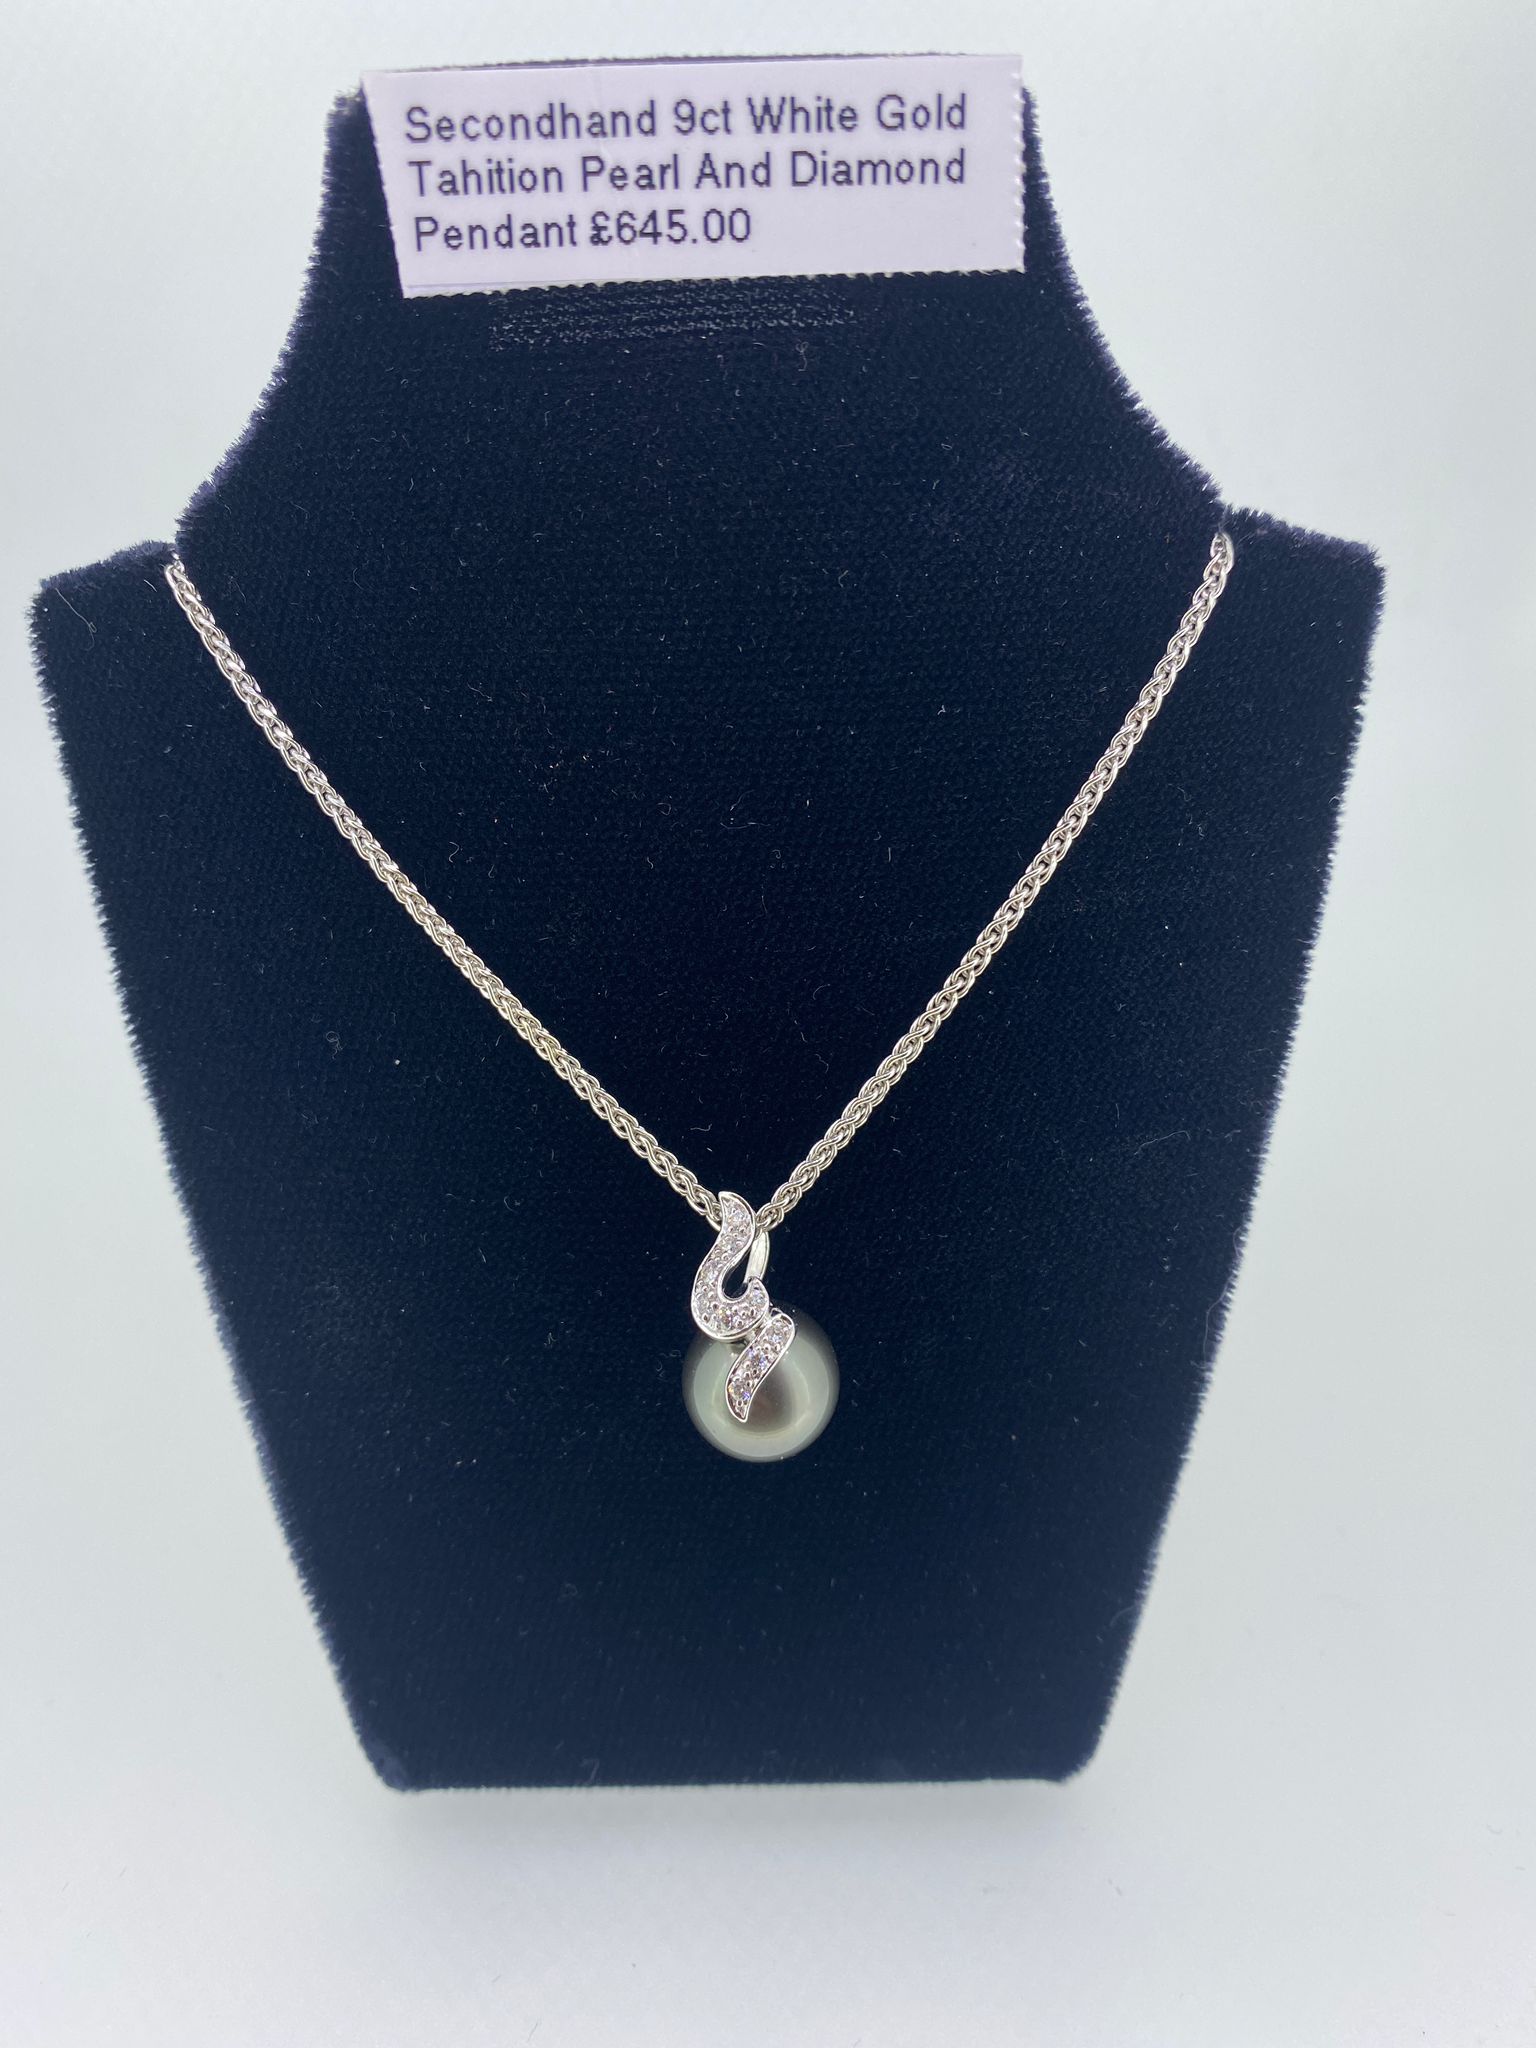 Secondhand 9ct White Gold Tahition Pearl & Diamond Pendant